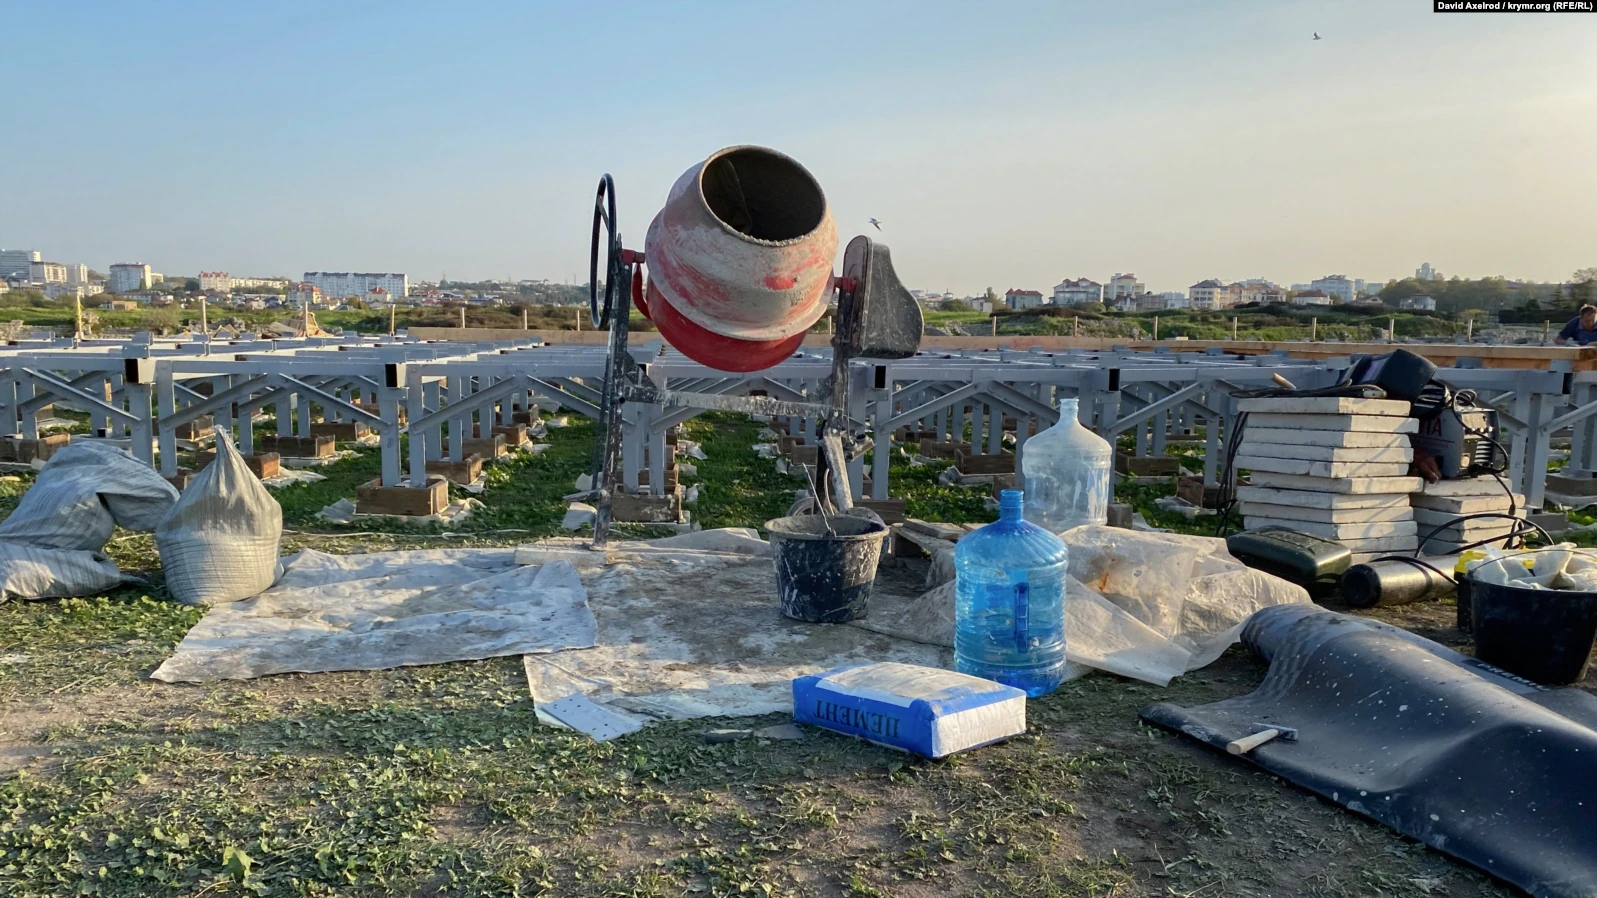 Criminal construction work conducted by Russian authorities damaging a UNESCO historical heritage site, the ruins of the ancient city of Tauric Chersonesus (also known in history as Chersonese or Chersonesos) in occupied Crimea, Ukraine. Photo: RFE/RL